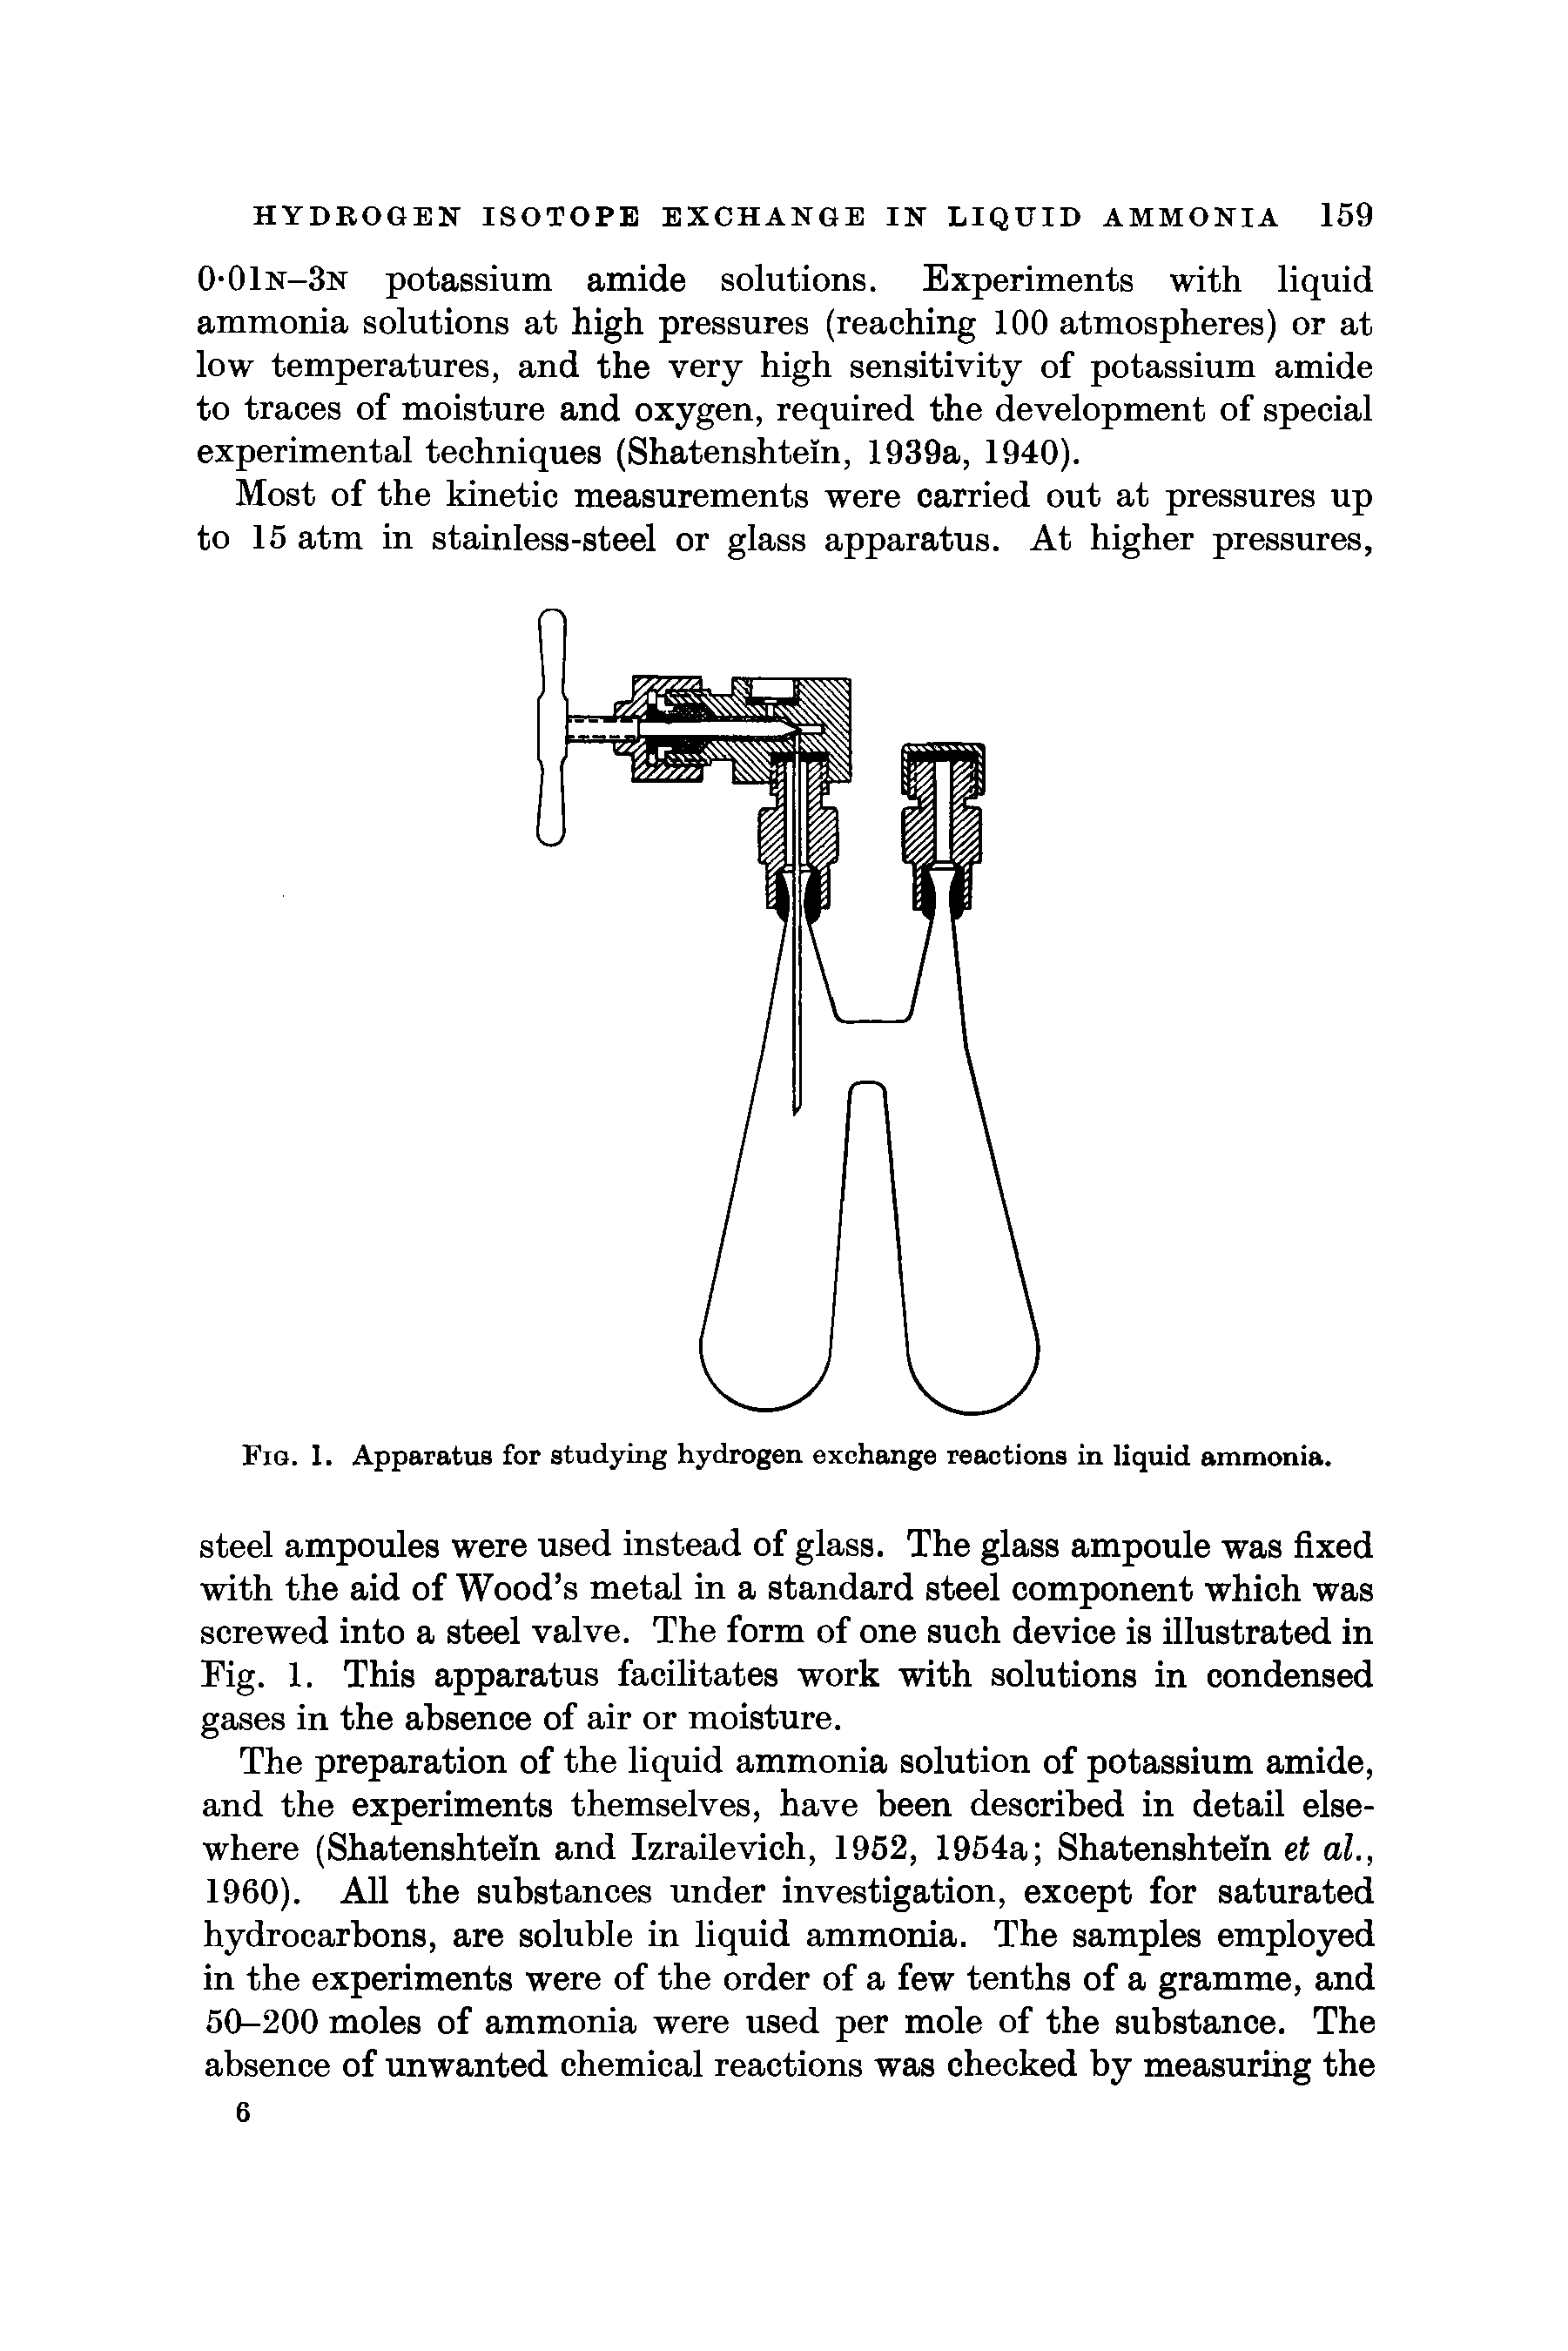 Fig. 1. Apparatus for studying hydrogen exchange reactions in liquid ammonia.